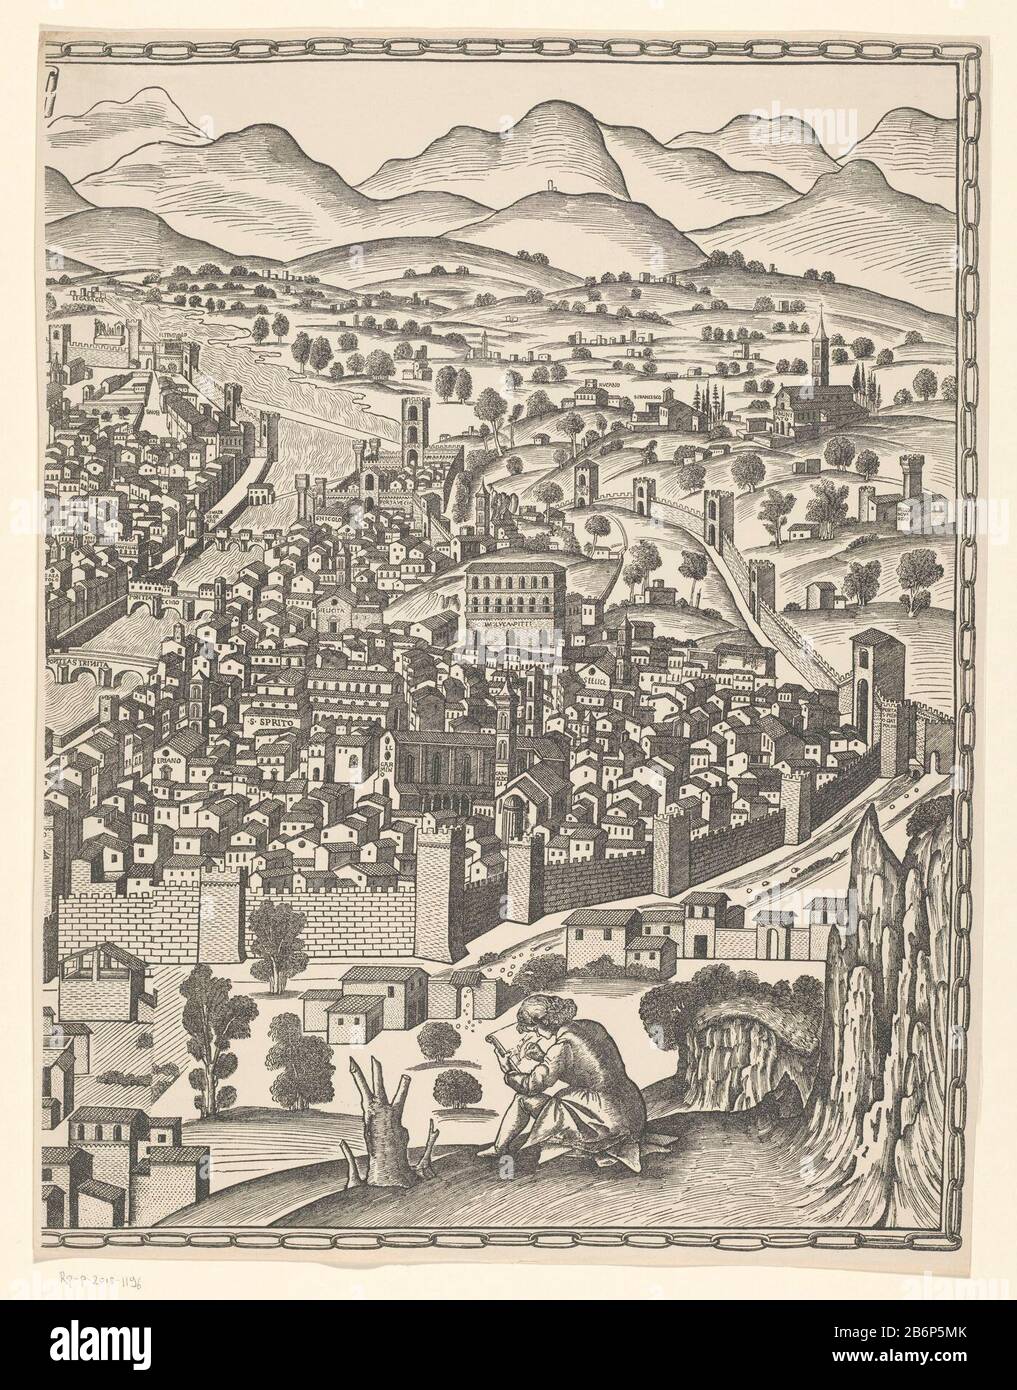 Gezicht op Florence (rechterdeel) Fiorenza (titel op object) Rothardt Berlin: Right portion of a view of Florence, in three parts, called the Pianta della Catena genoemd. Manufacturer : printmaker Francesco Rosselli (copy to) printer: Reichsdruckerei (listed property) Place manufacture: printmaker: Florence Publisher: Berlin Dated: approximately 1480 and / or 1879 - 1949 Material: paper Technique: cliché Dimensions: sheet: h 588 mm × W 444 mm Subject: prospect of city, town panorama silhouette of city where Florence Stock Photo